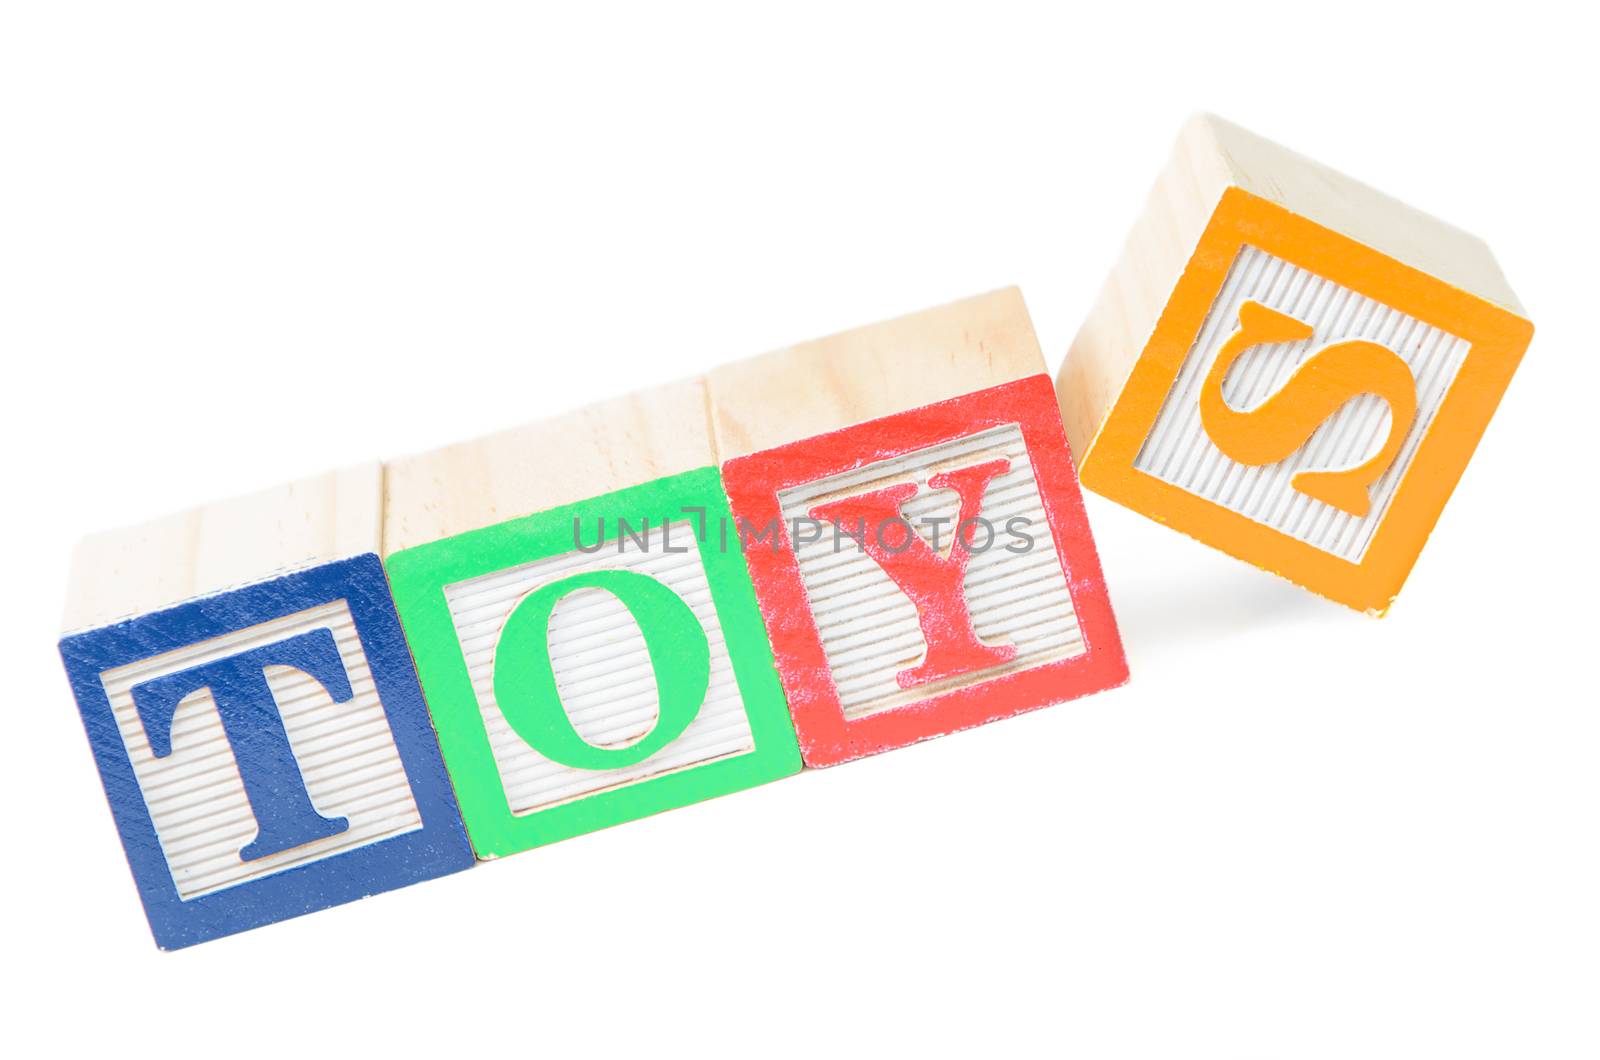 Baby blocks spelling toys by dragon_fang